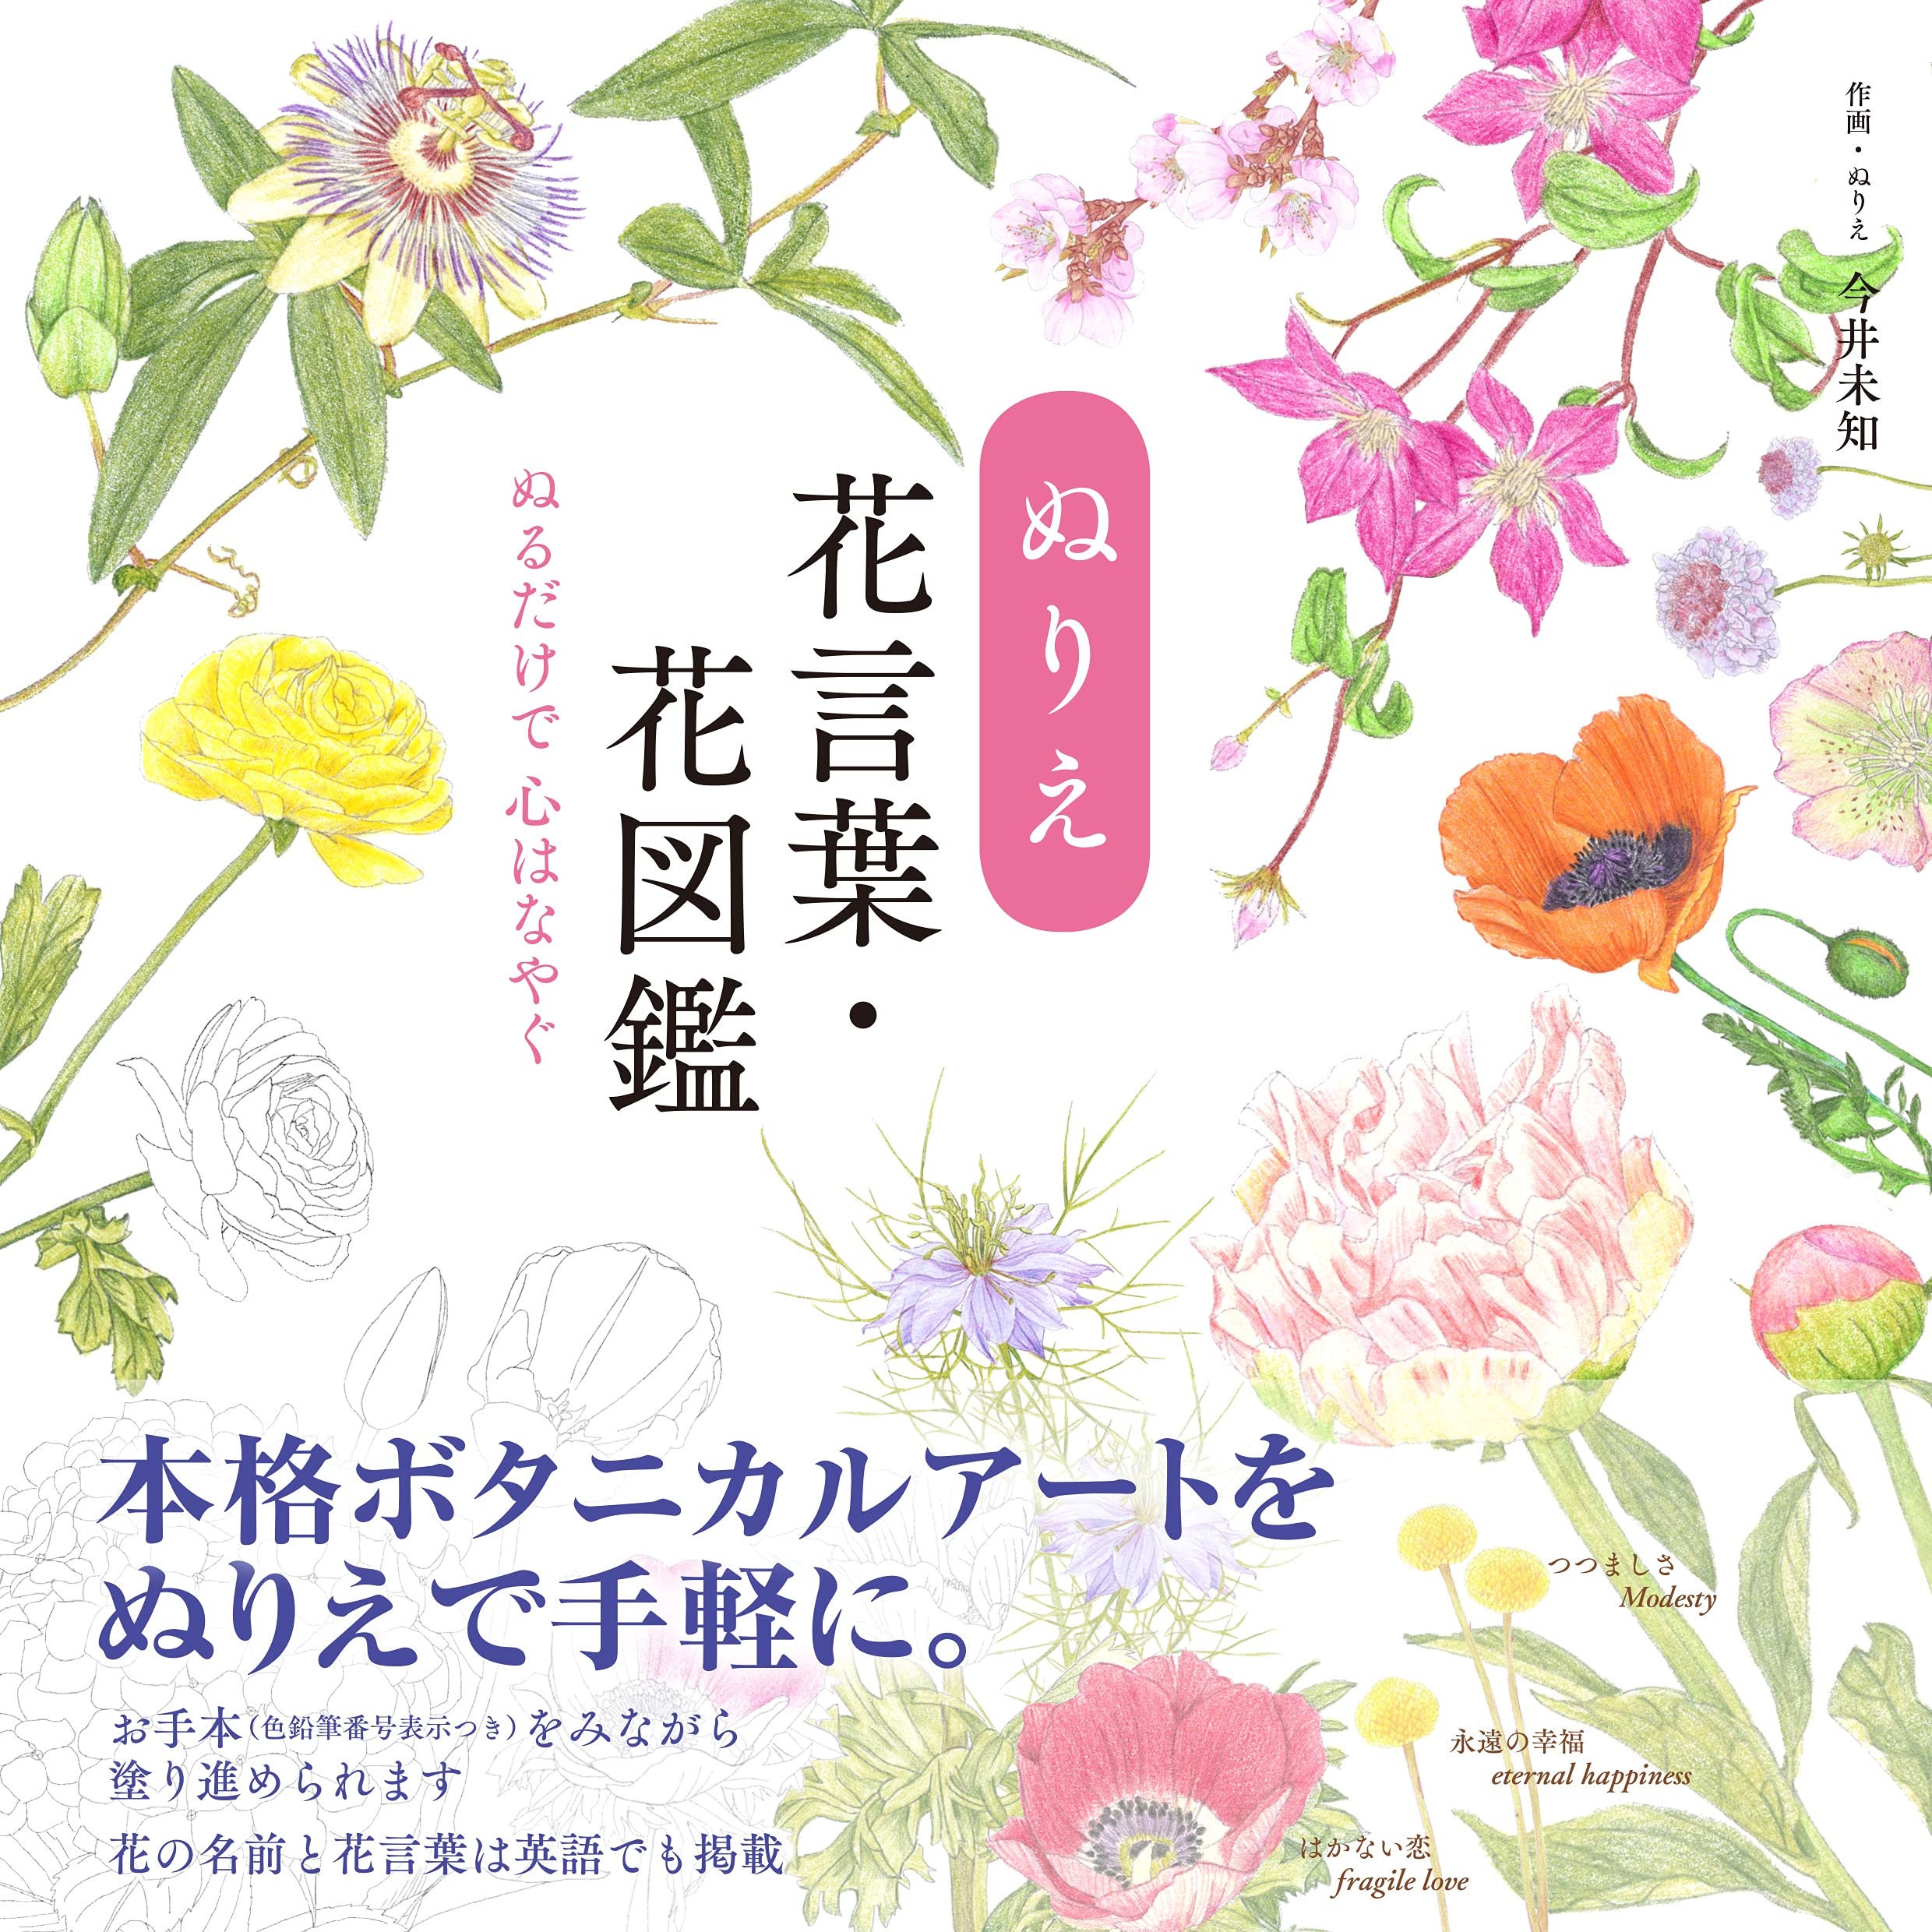 Coloring Book Of The Language Of Flowers Japanese Craft Book Etsy